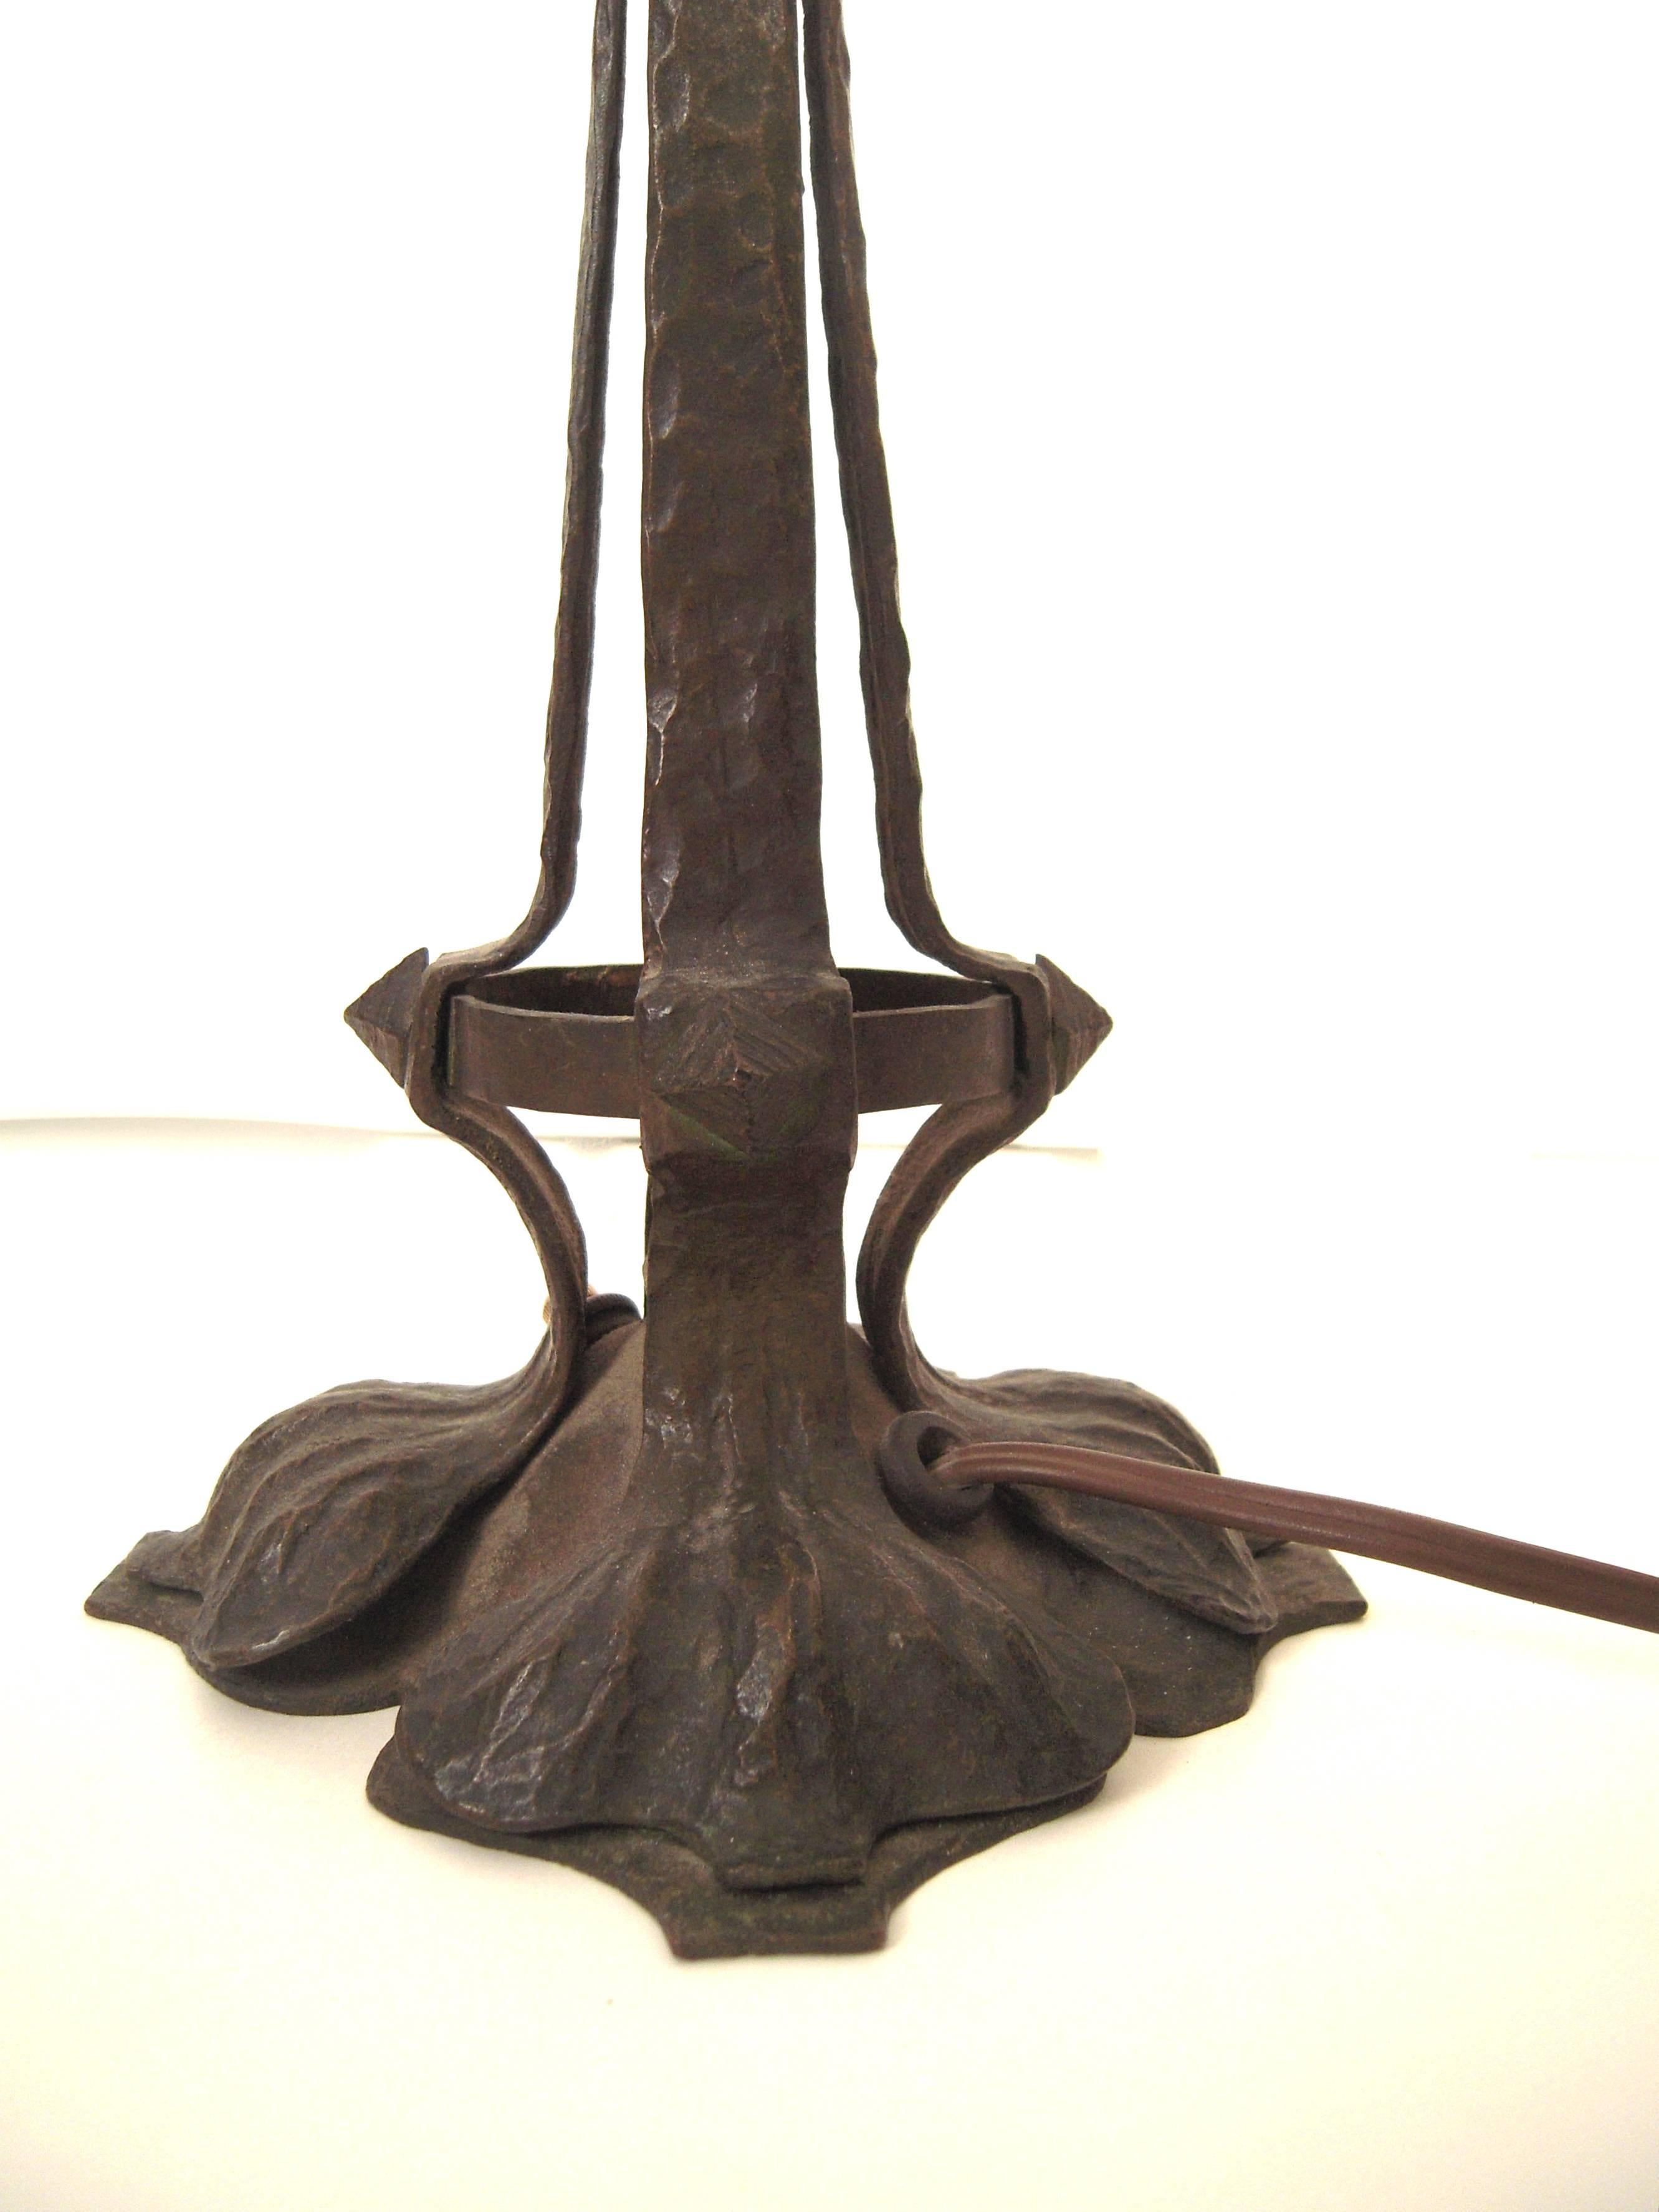 American Arts and Crafts Period Wrought Iron and Mica Lamp